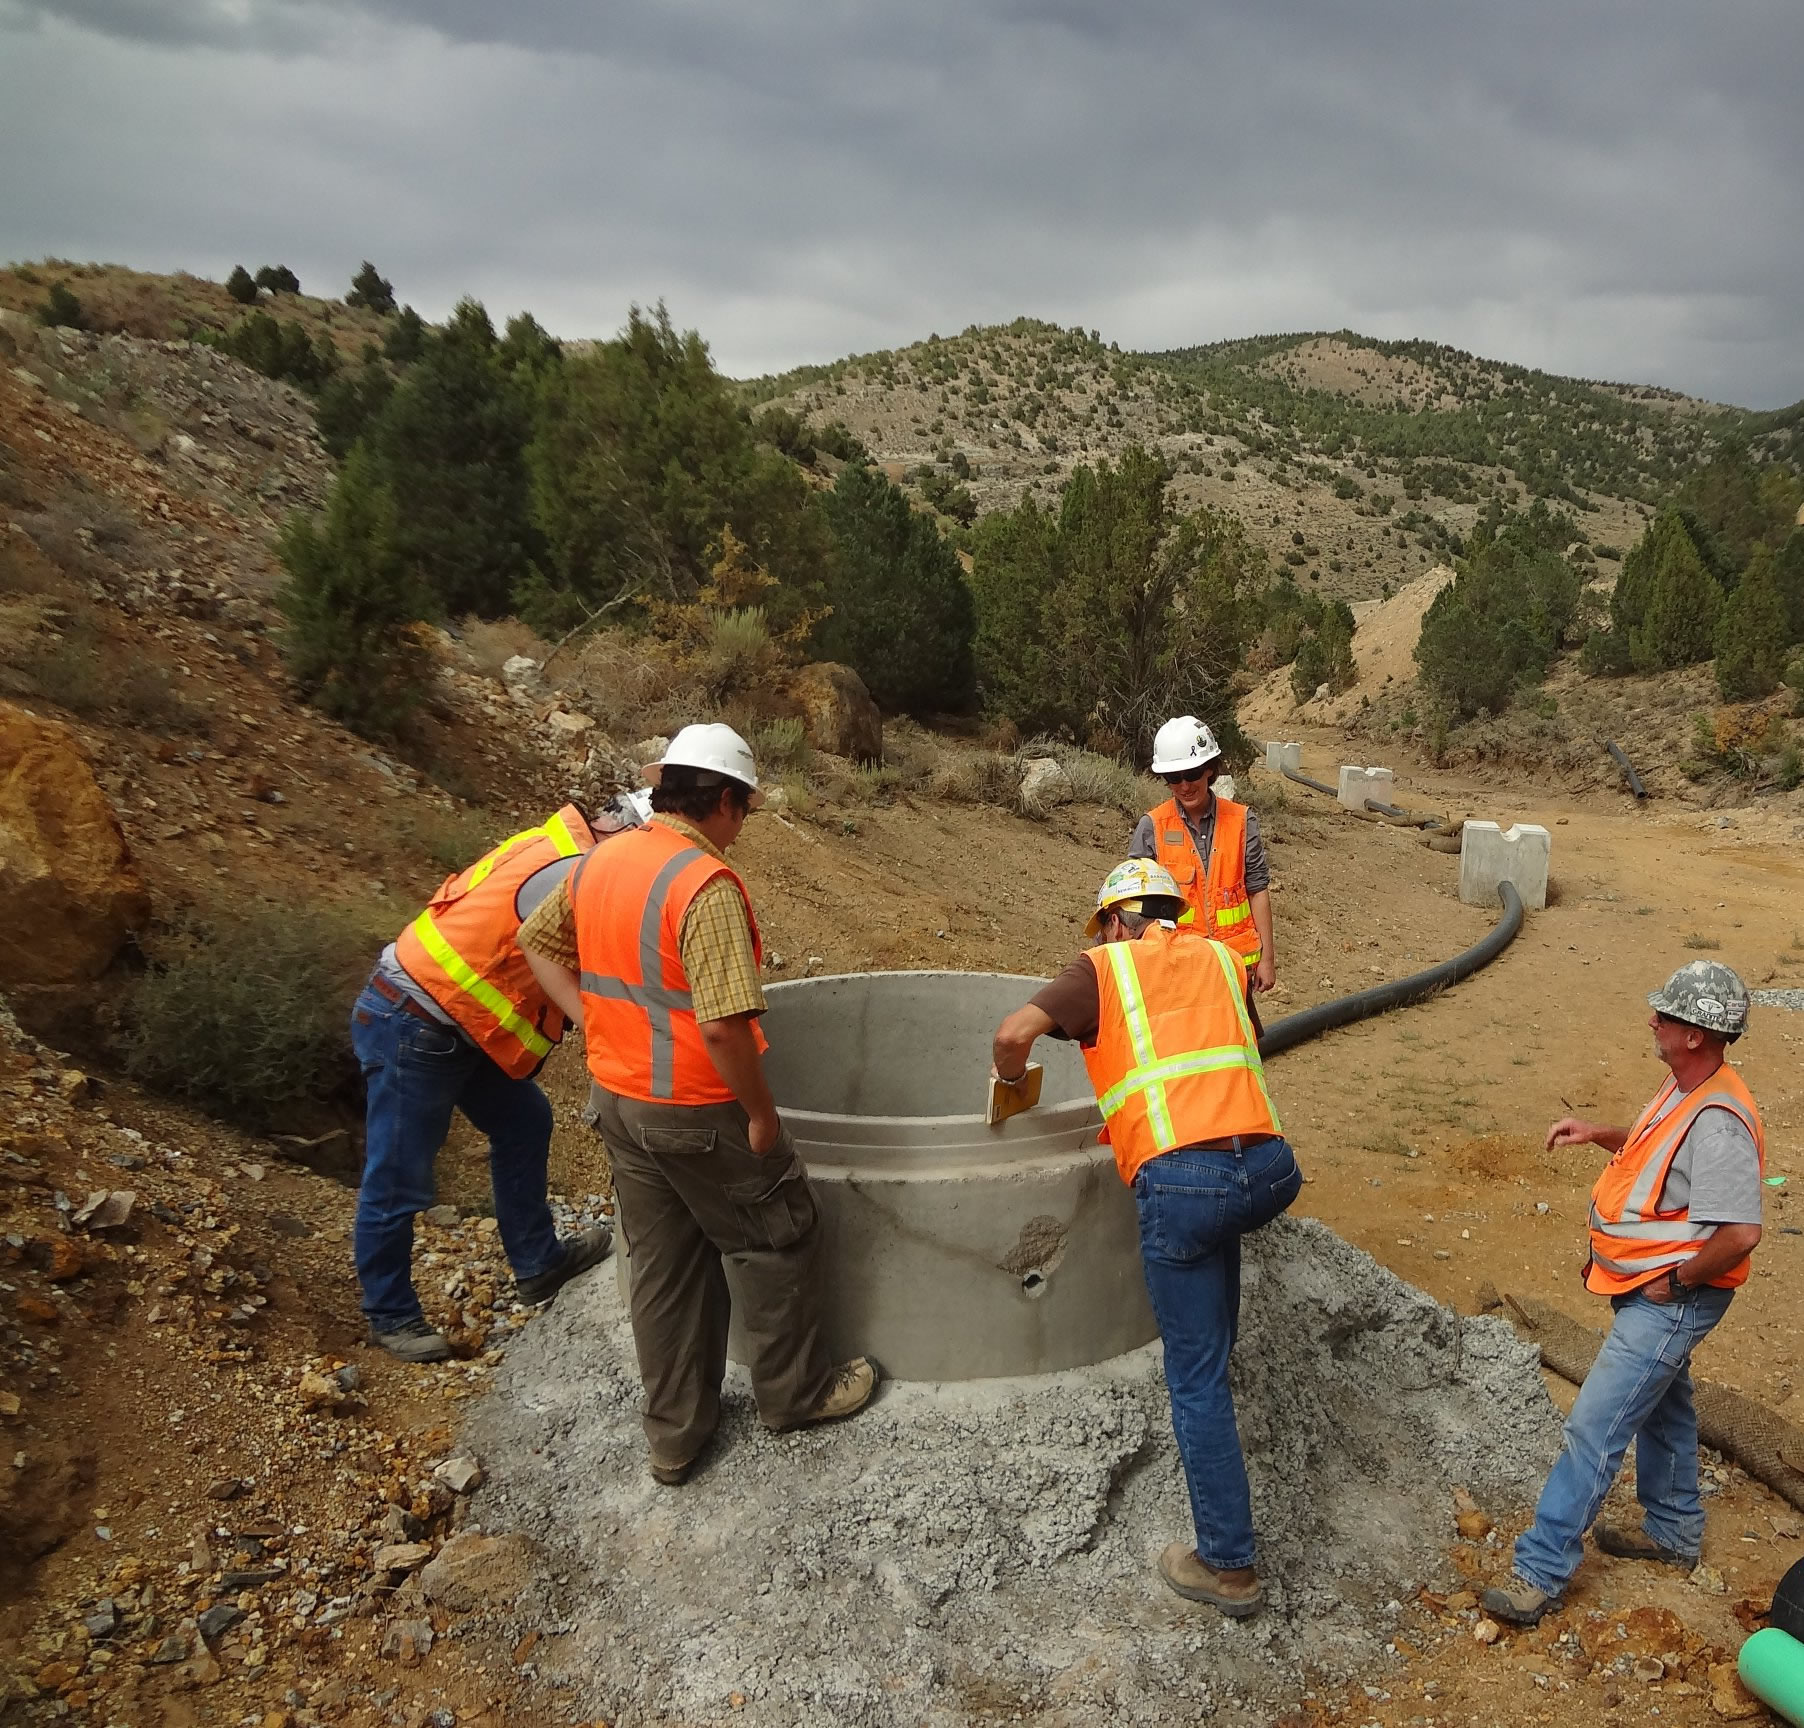 BMRR employees inspecting a sump near a mine site.